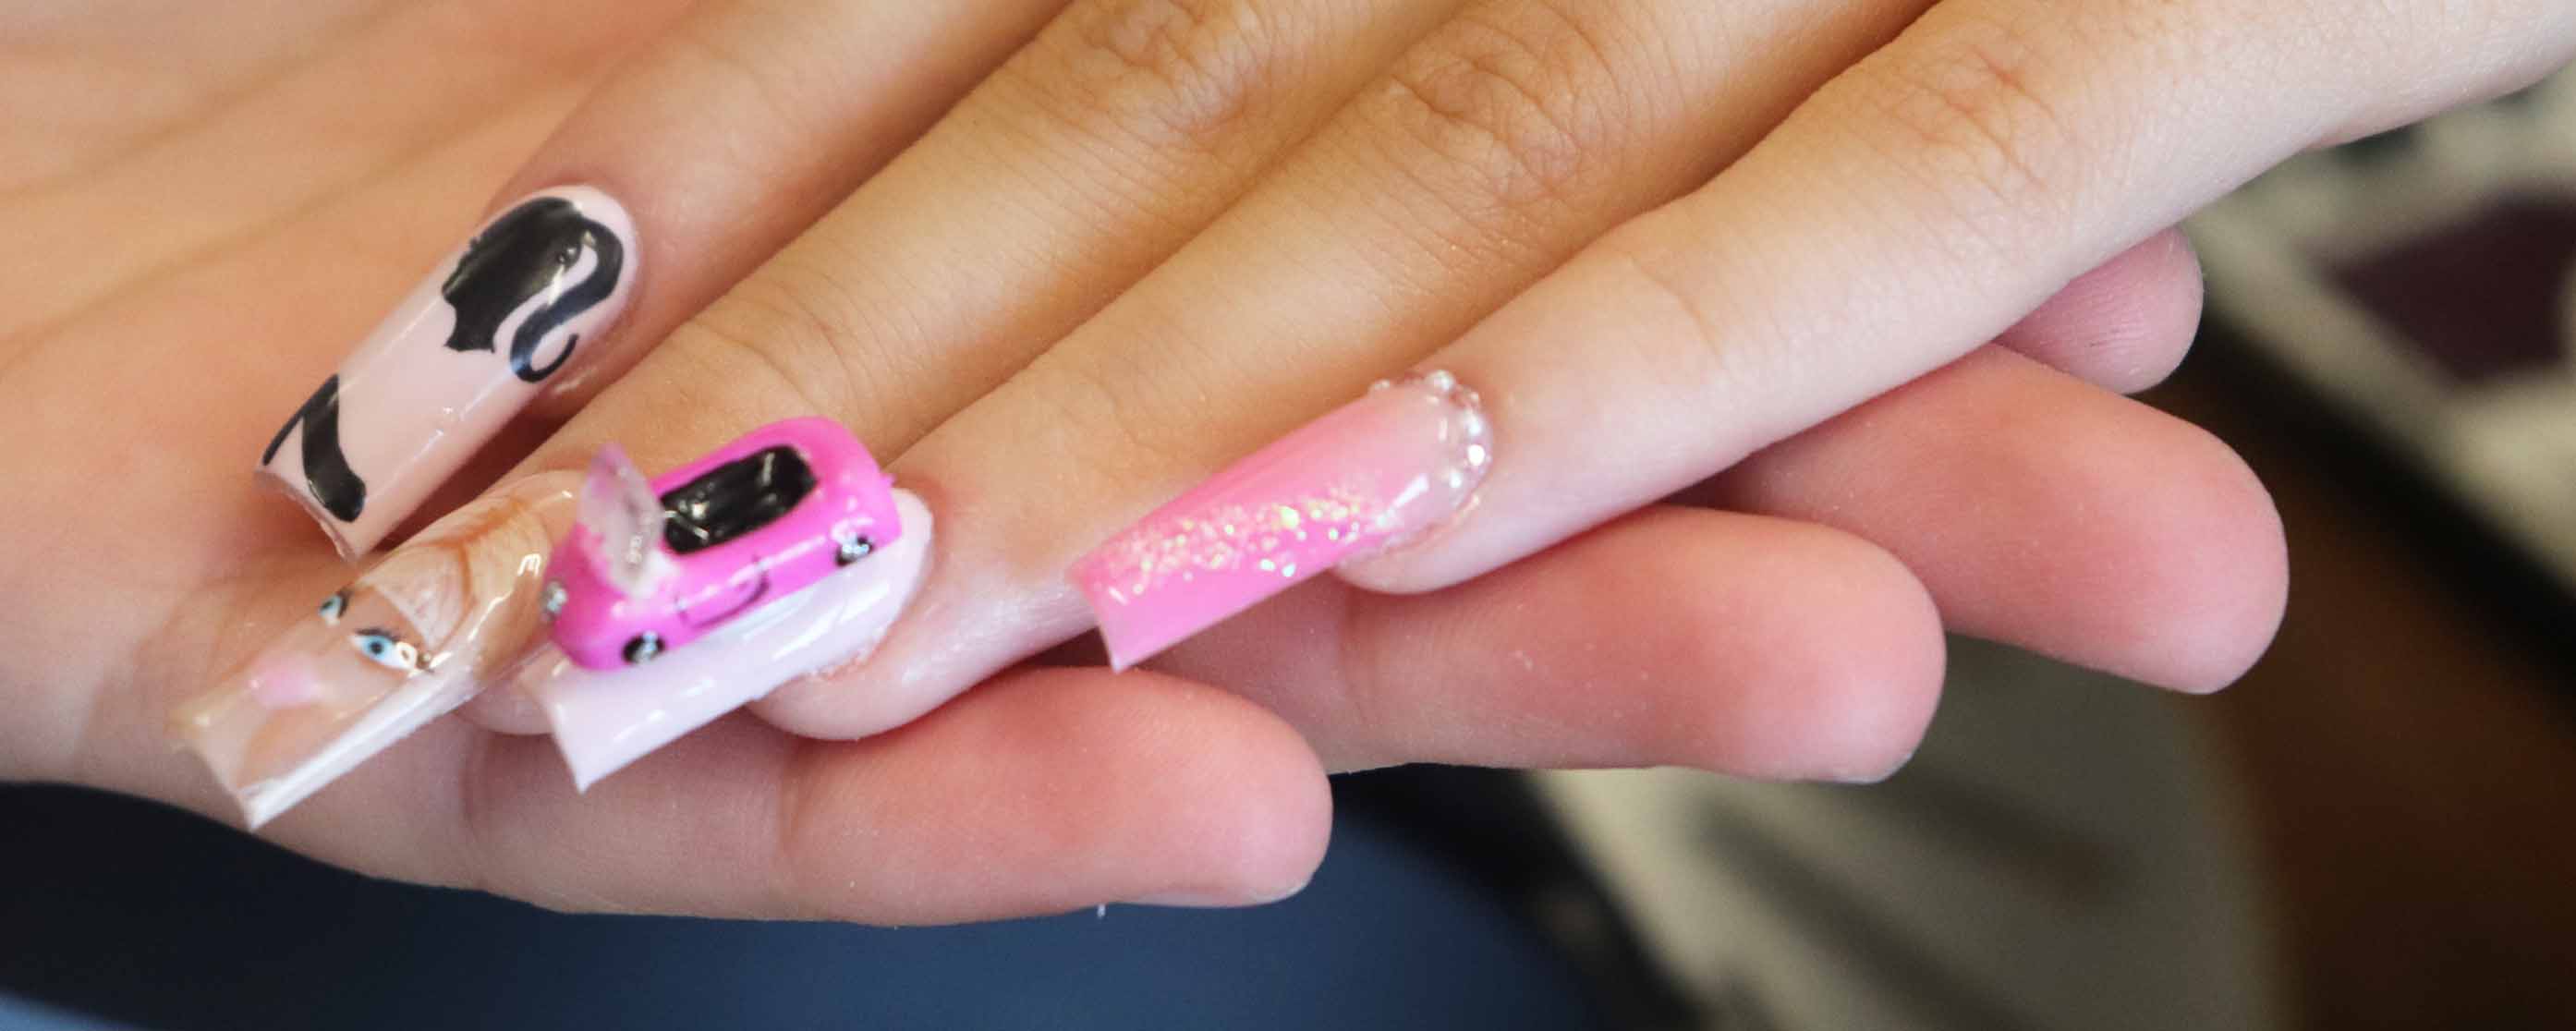 Barbie features on nails